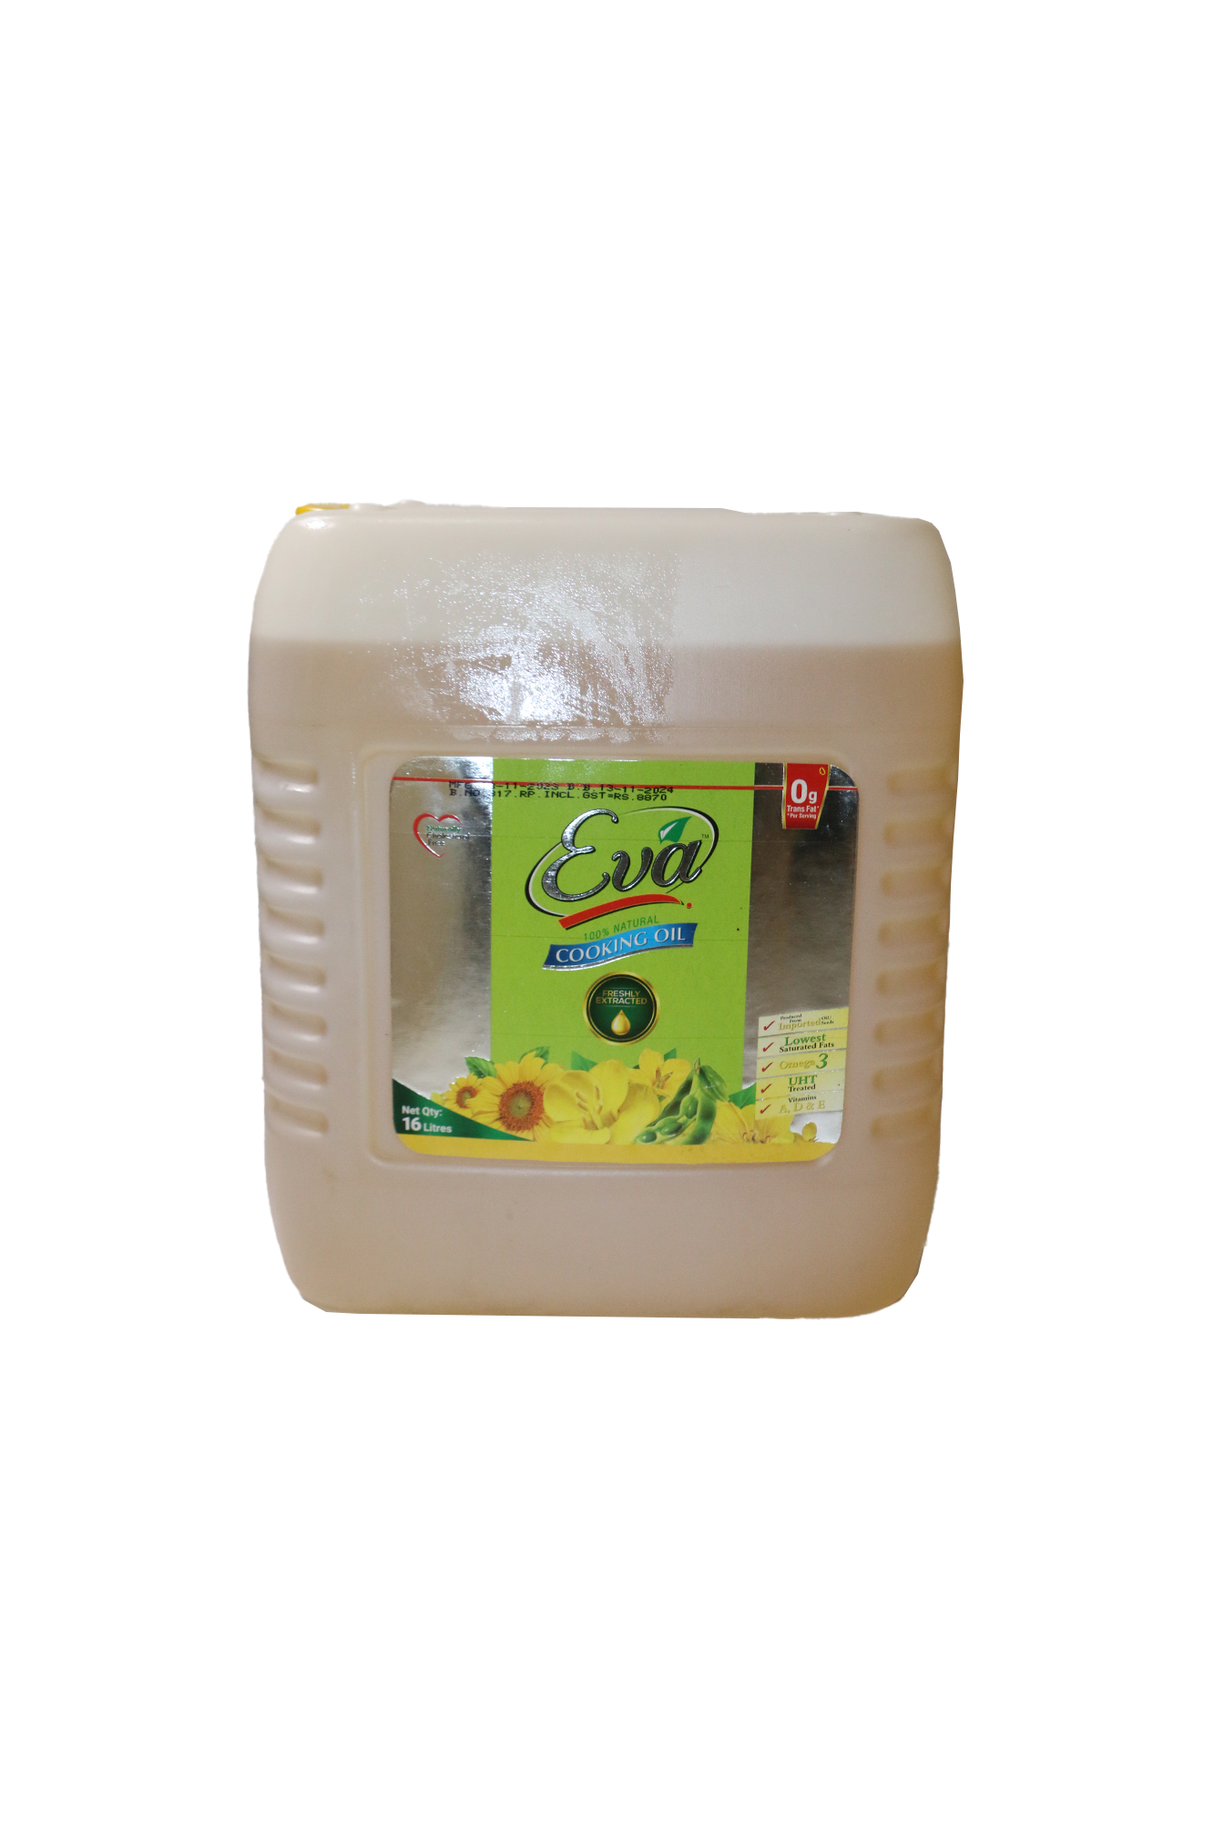 eva cooking oil 16l can